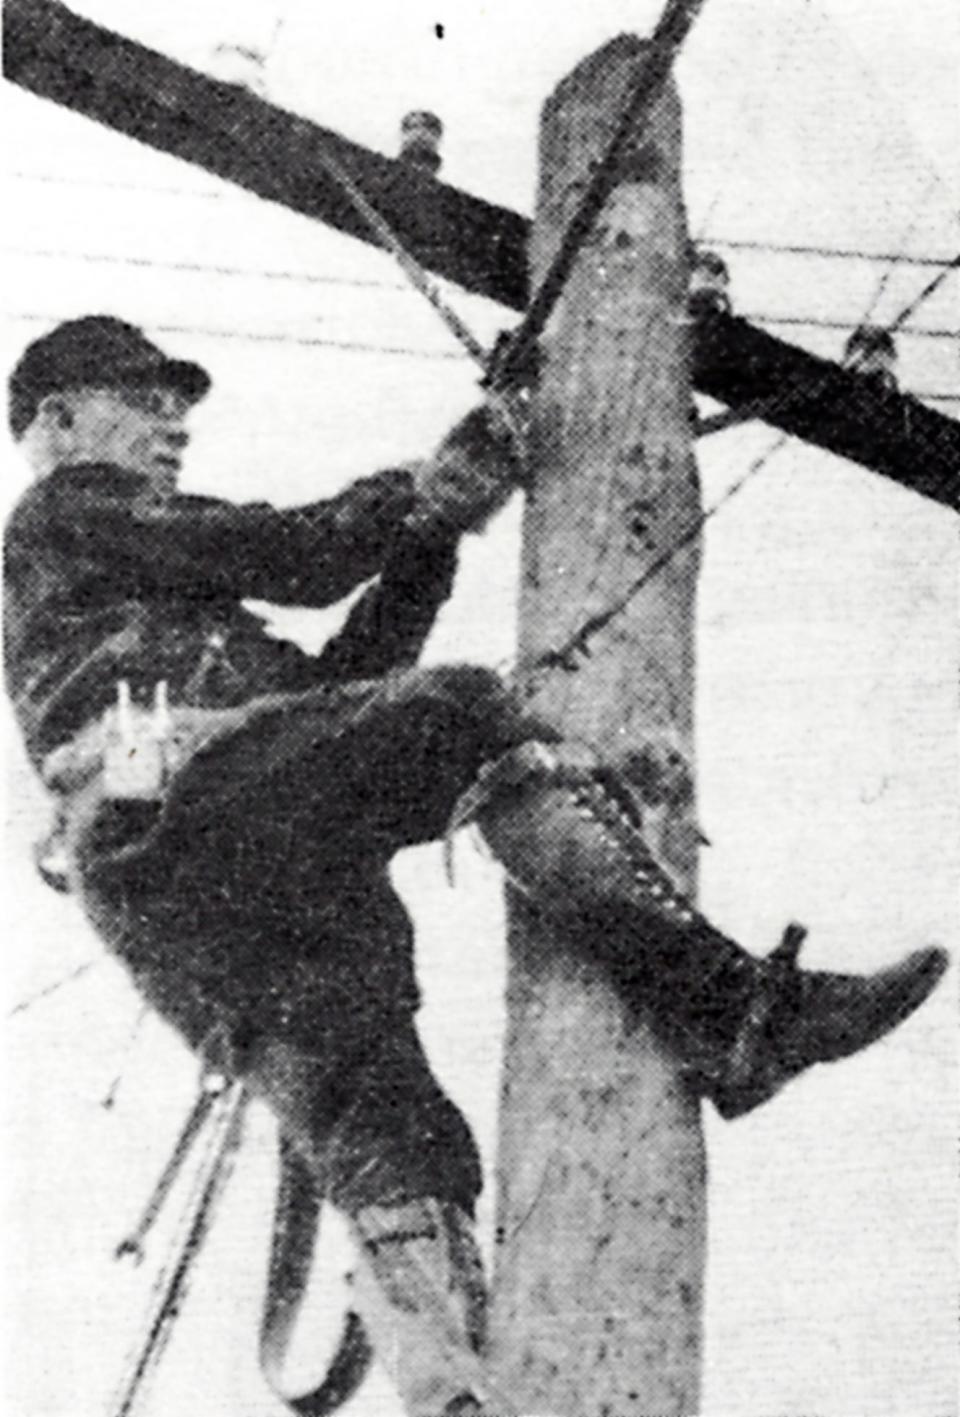 George Smith working on one of the lines in the 1940s.